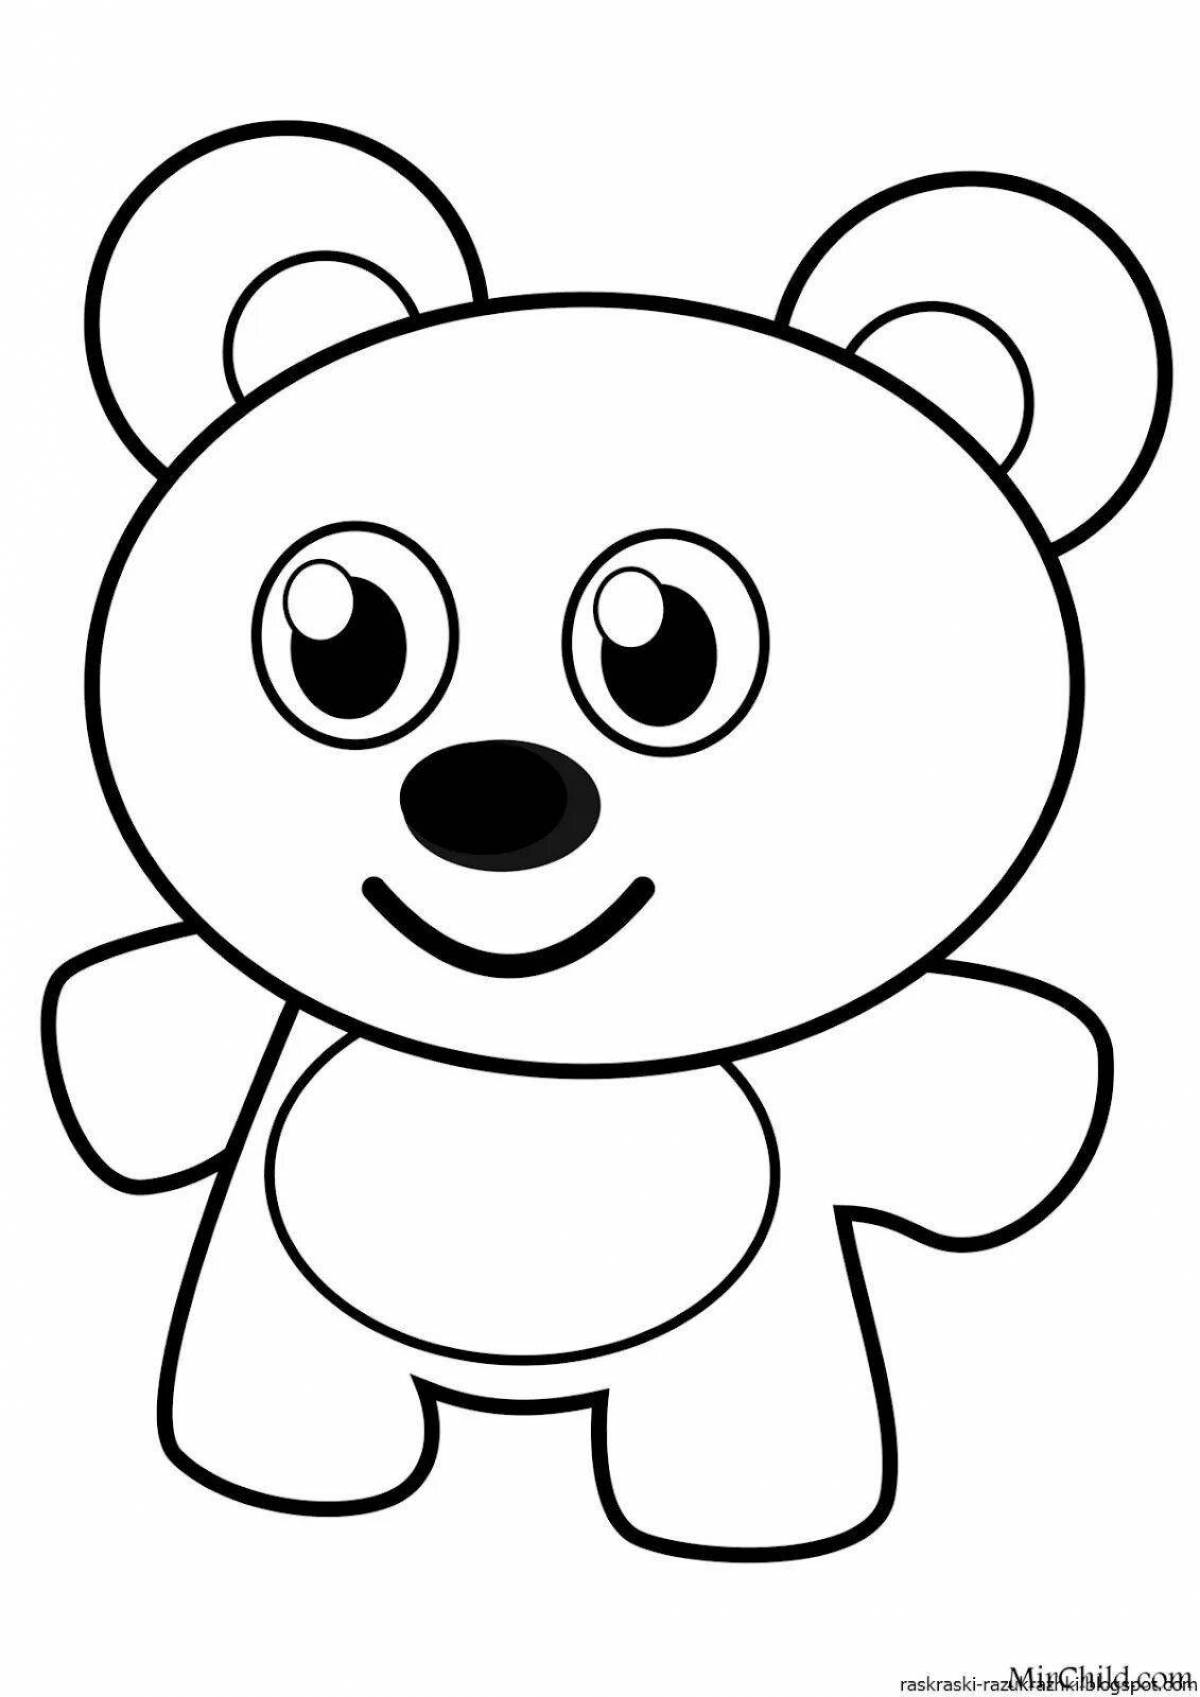 Fun coloring pages for kids